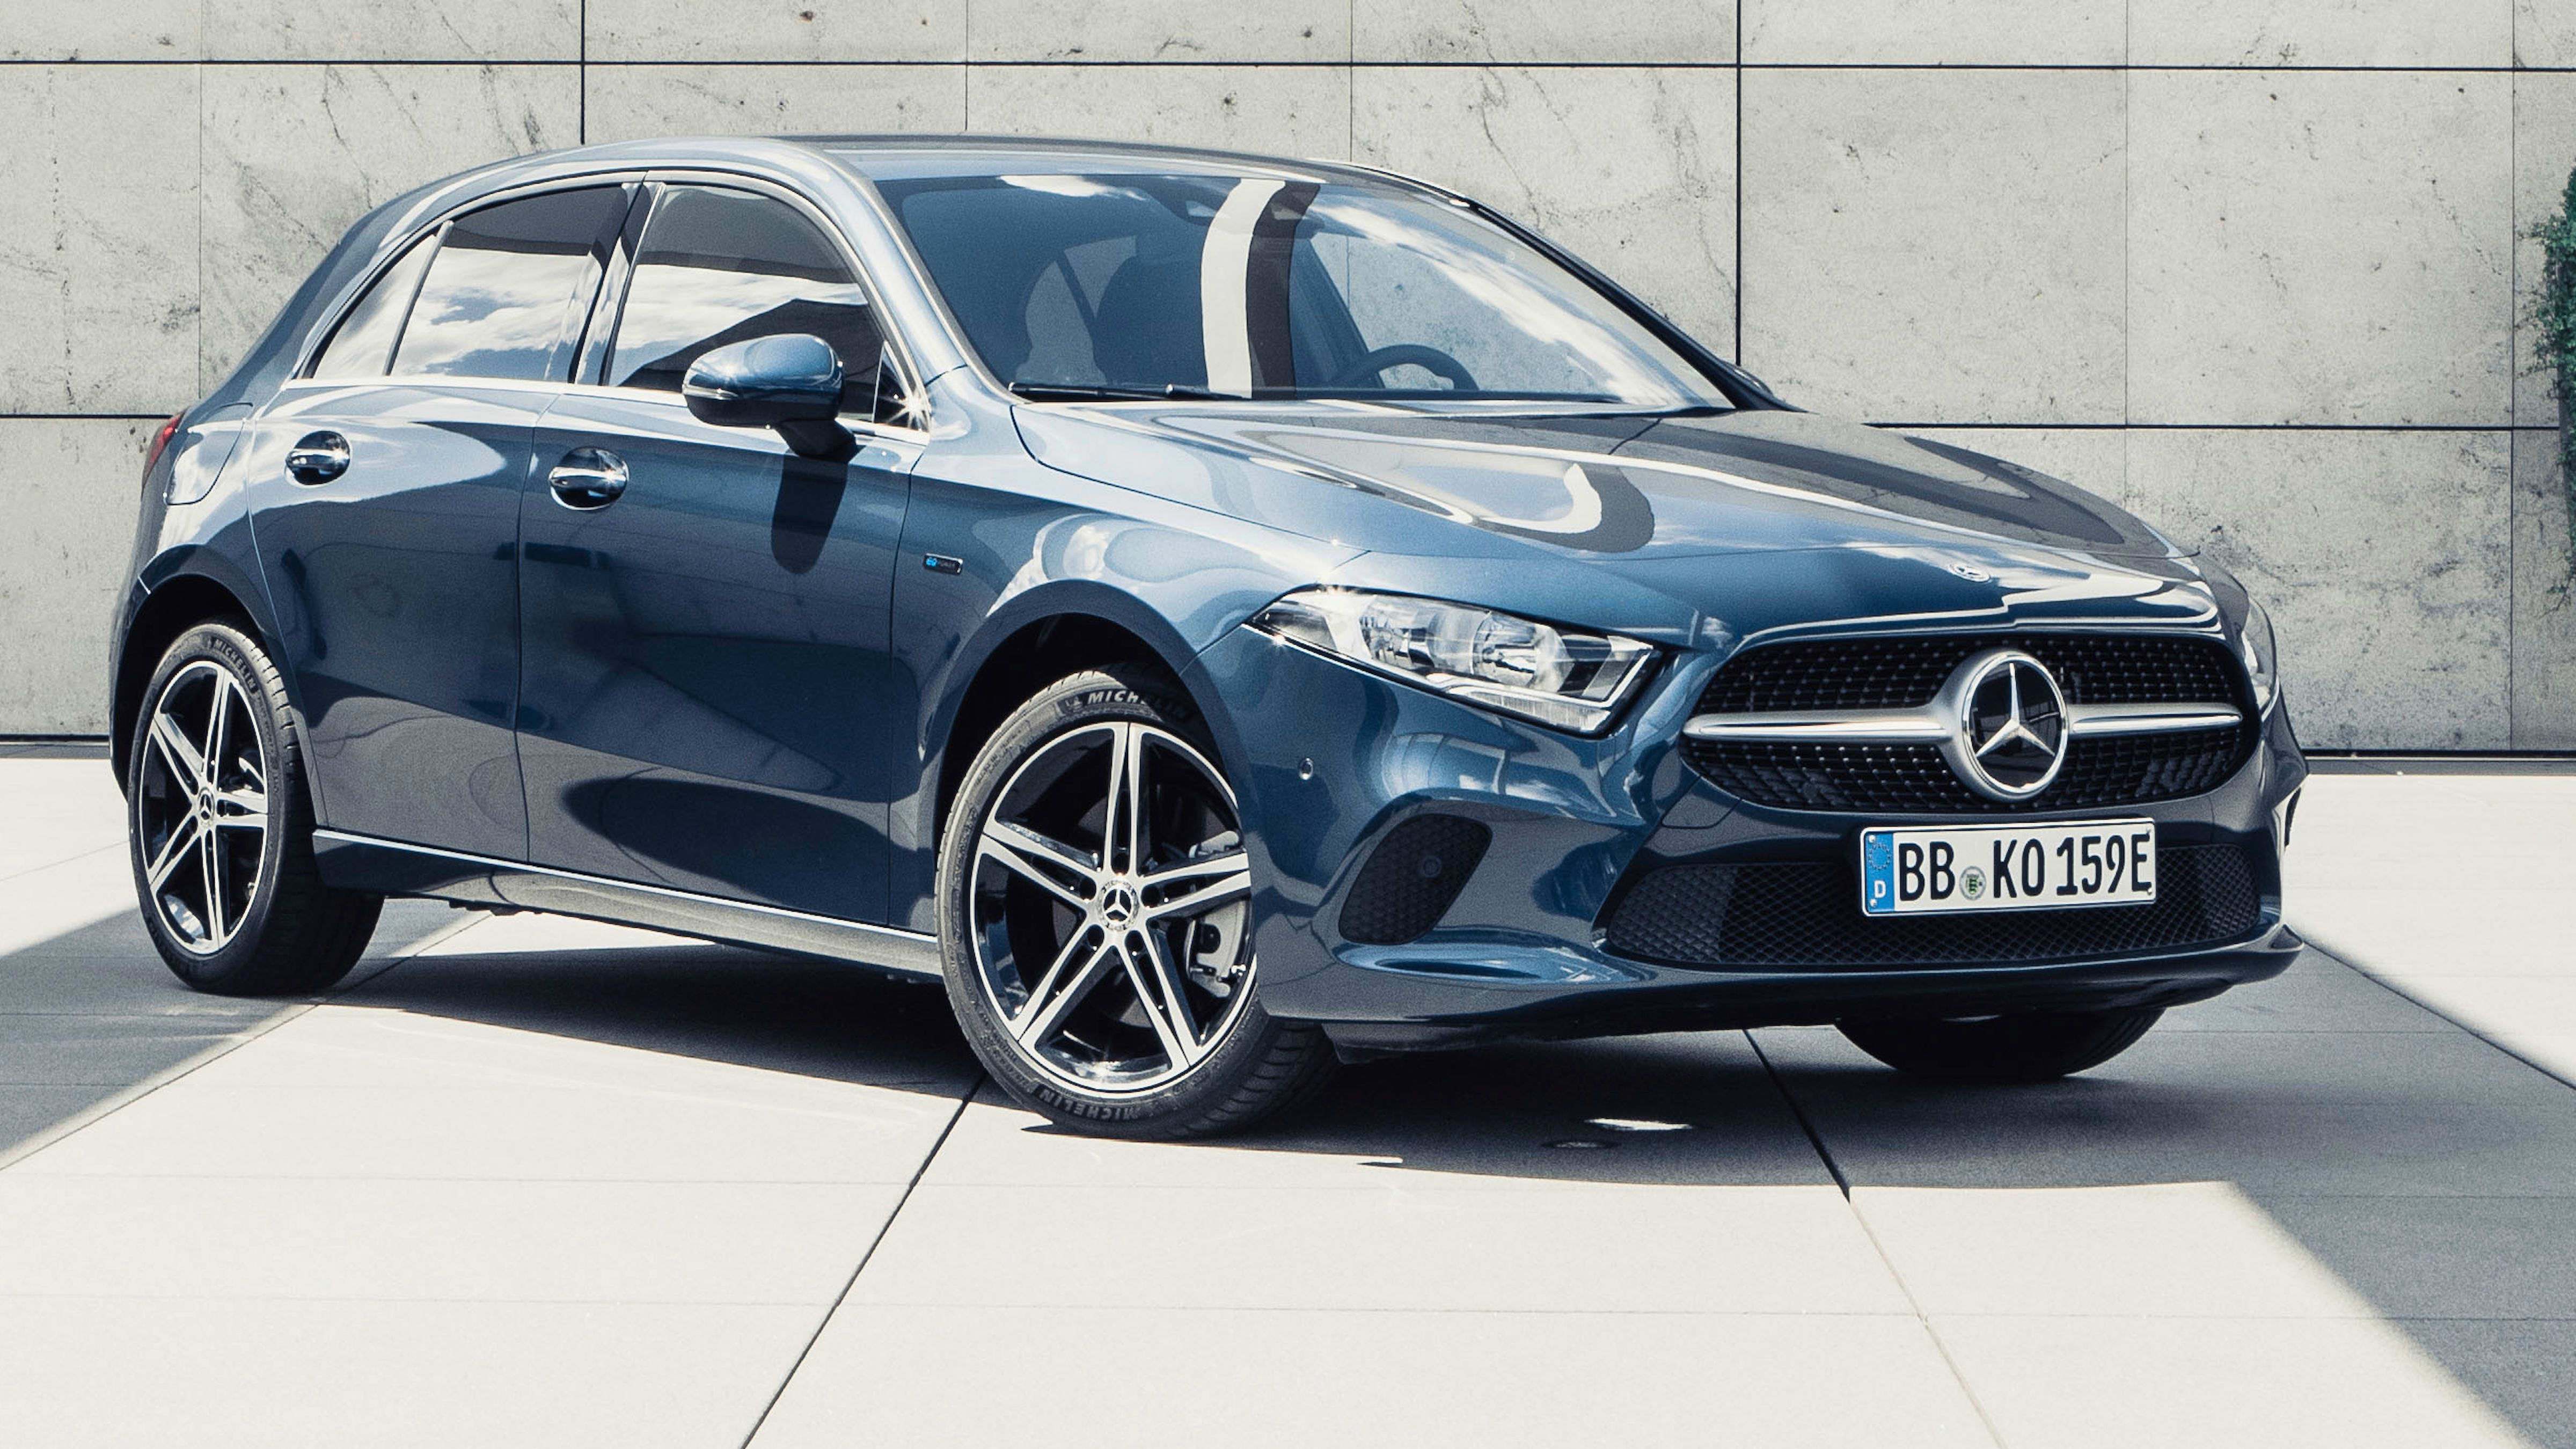 2021 Mercedes-Benz A250e price and specs: Plug-in hybrid now